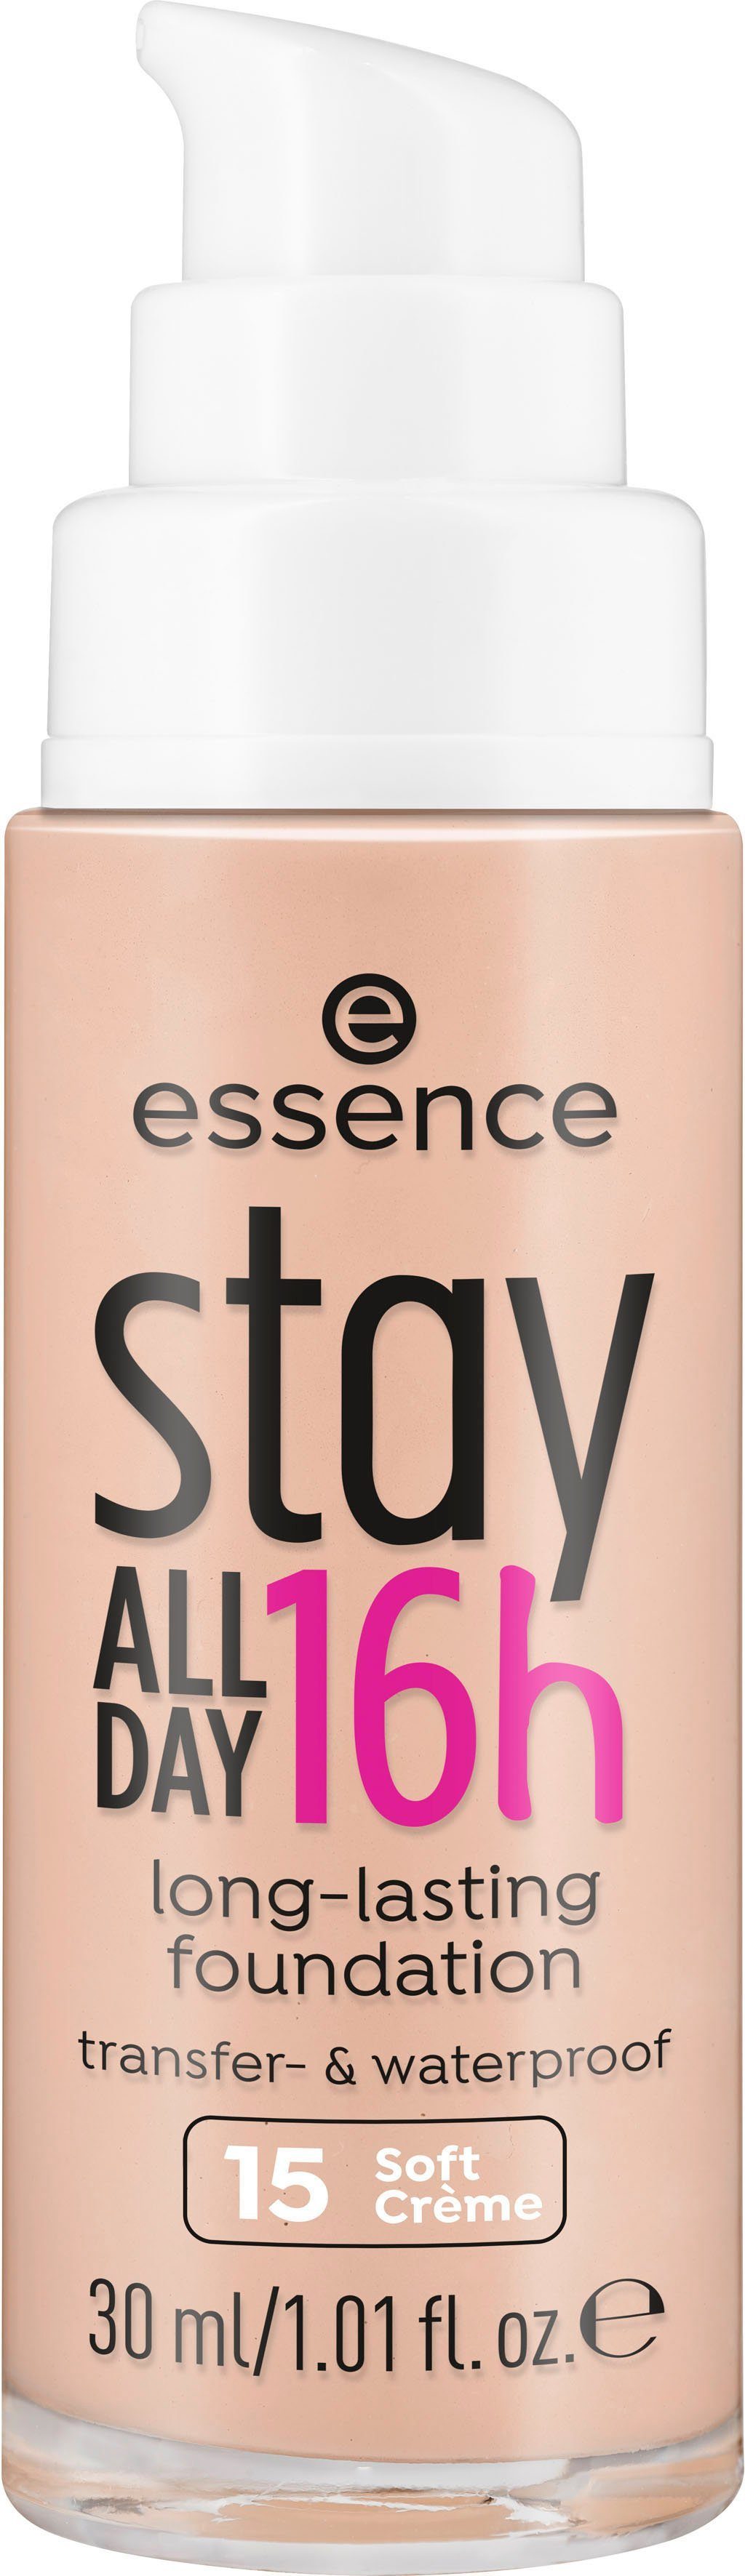 Essence Foundation stay long-lasting, ALL Soft 3-tlg. DAY Creme 16h